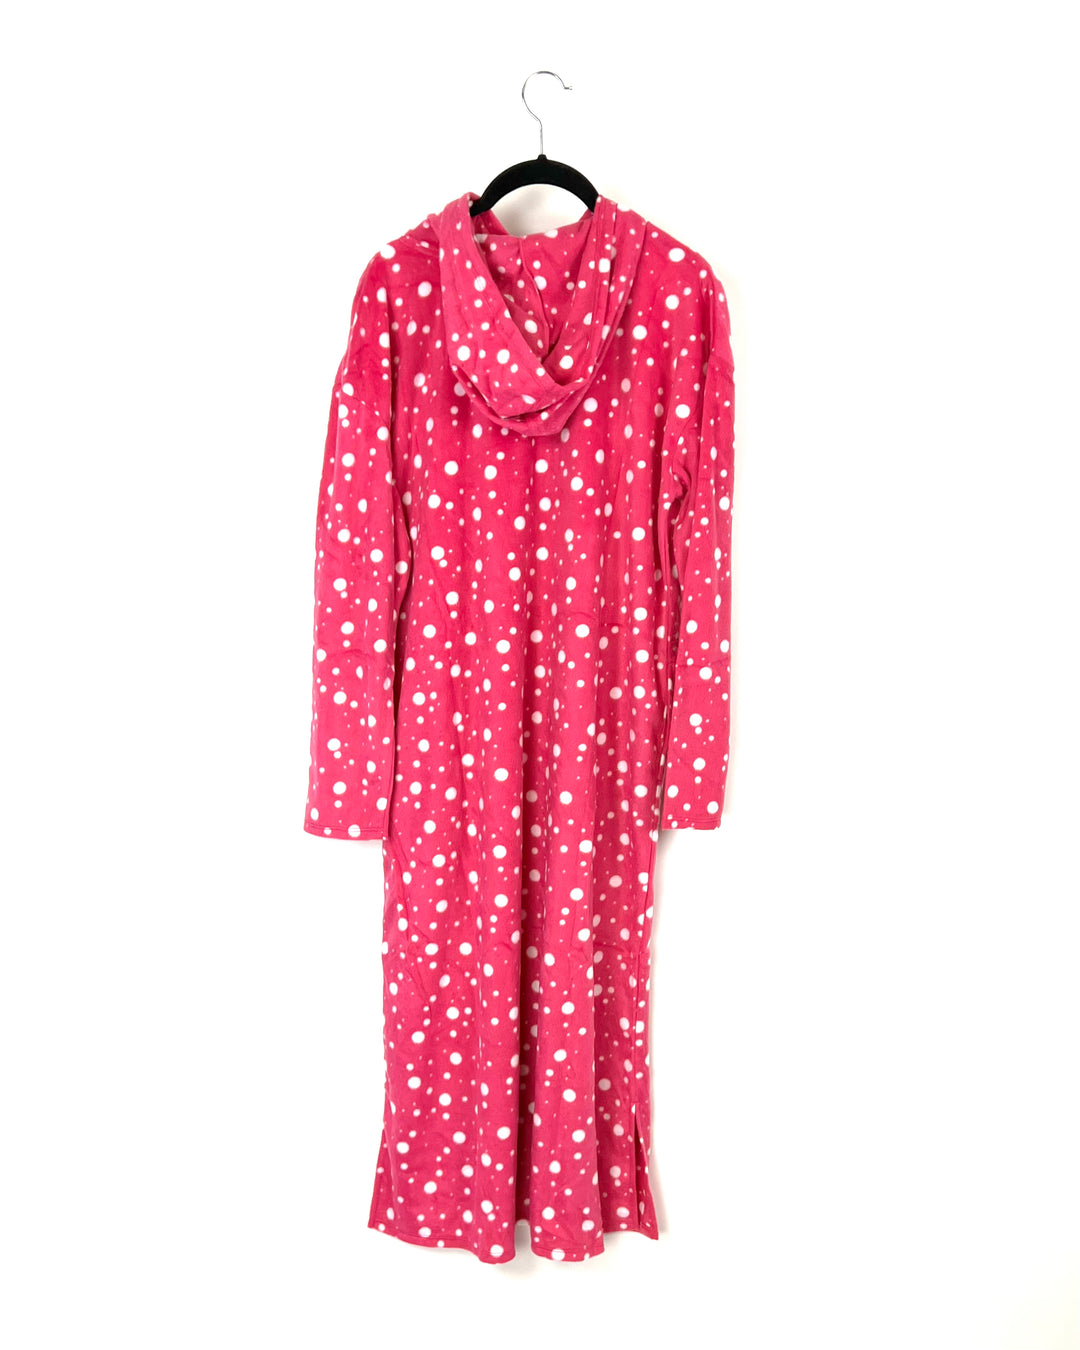 Pink And White Polkadot Nightgown - Size 6/8